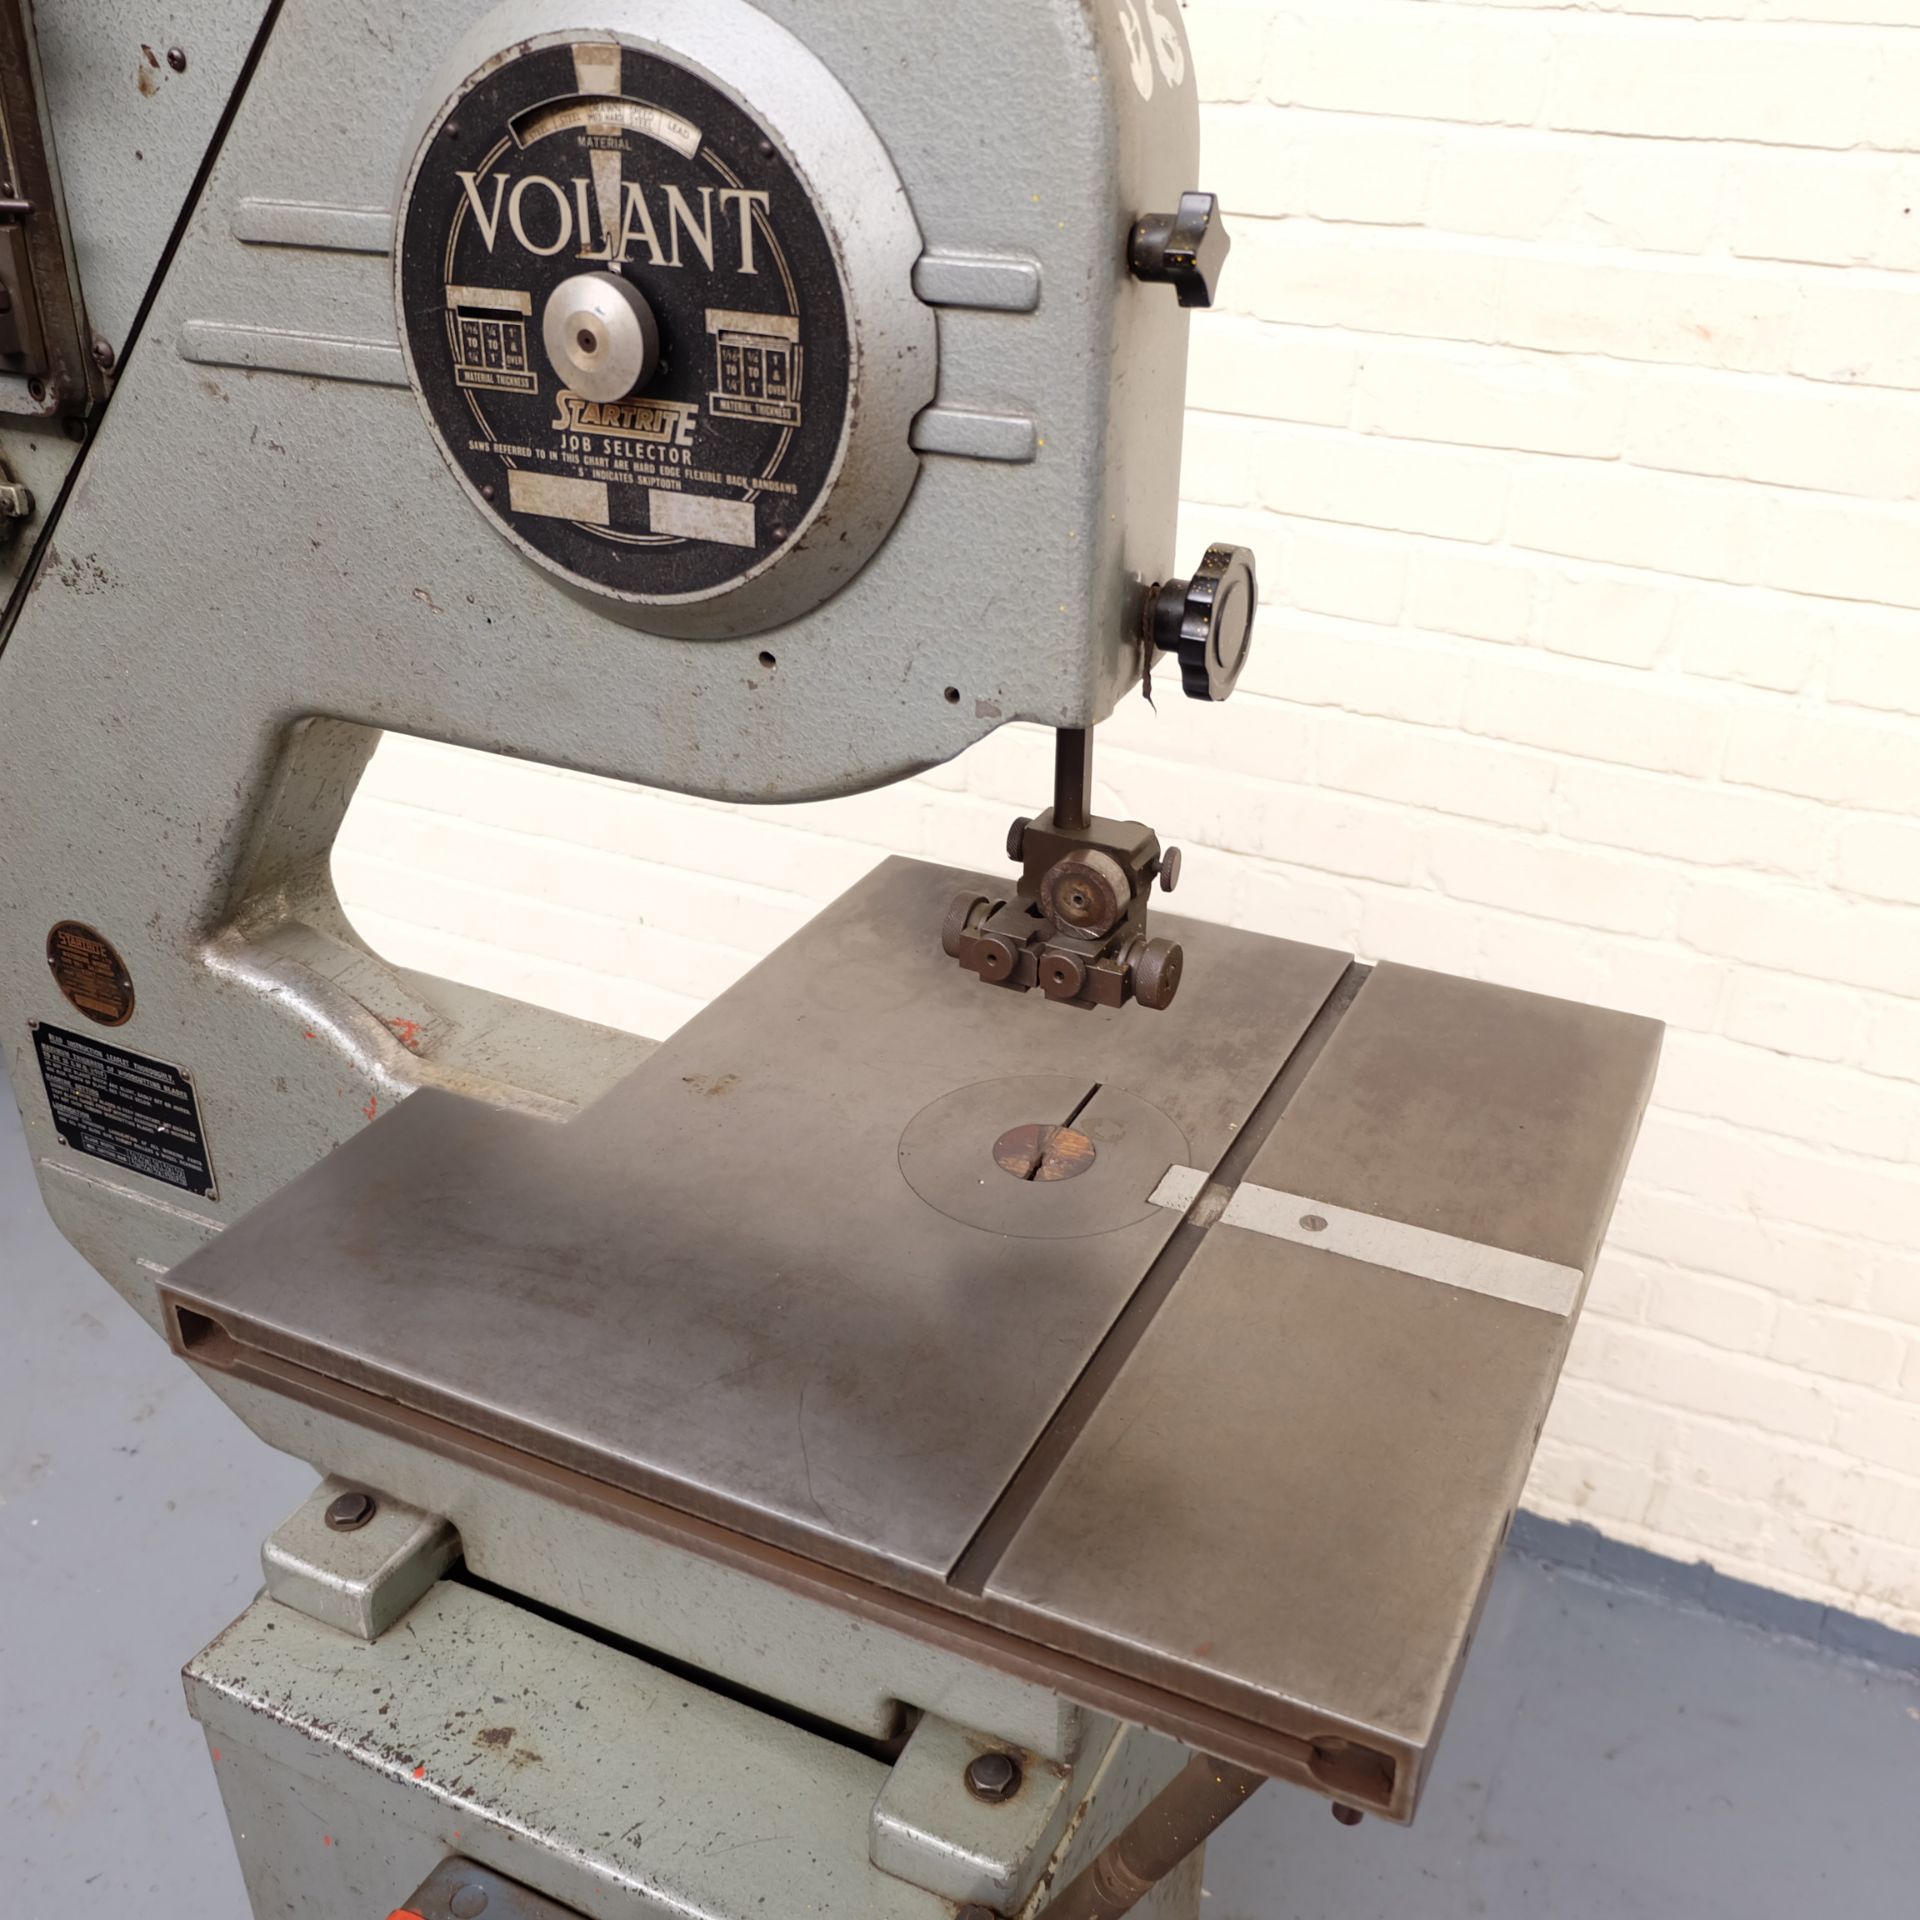 A STARTRITE Volant Vertical Bandsaw, Throat 18in, - Image 4 of 7